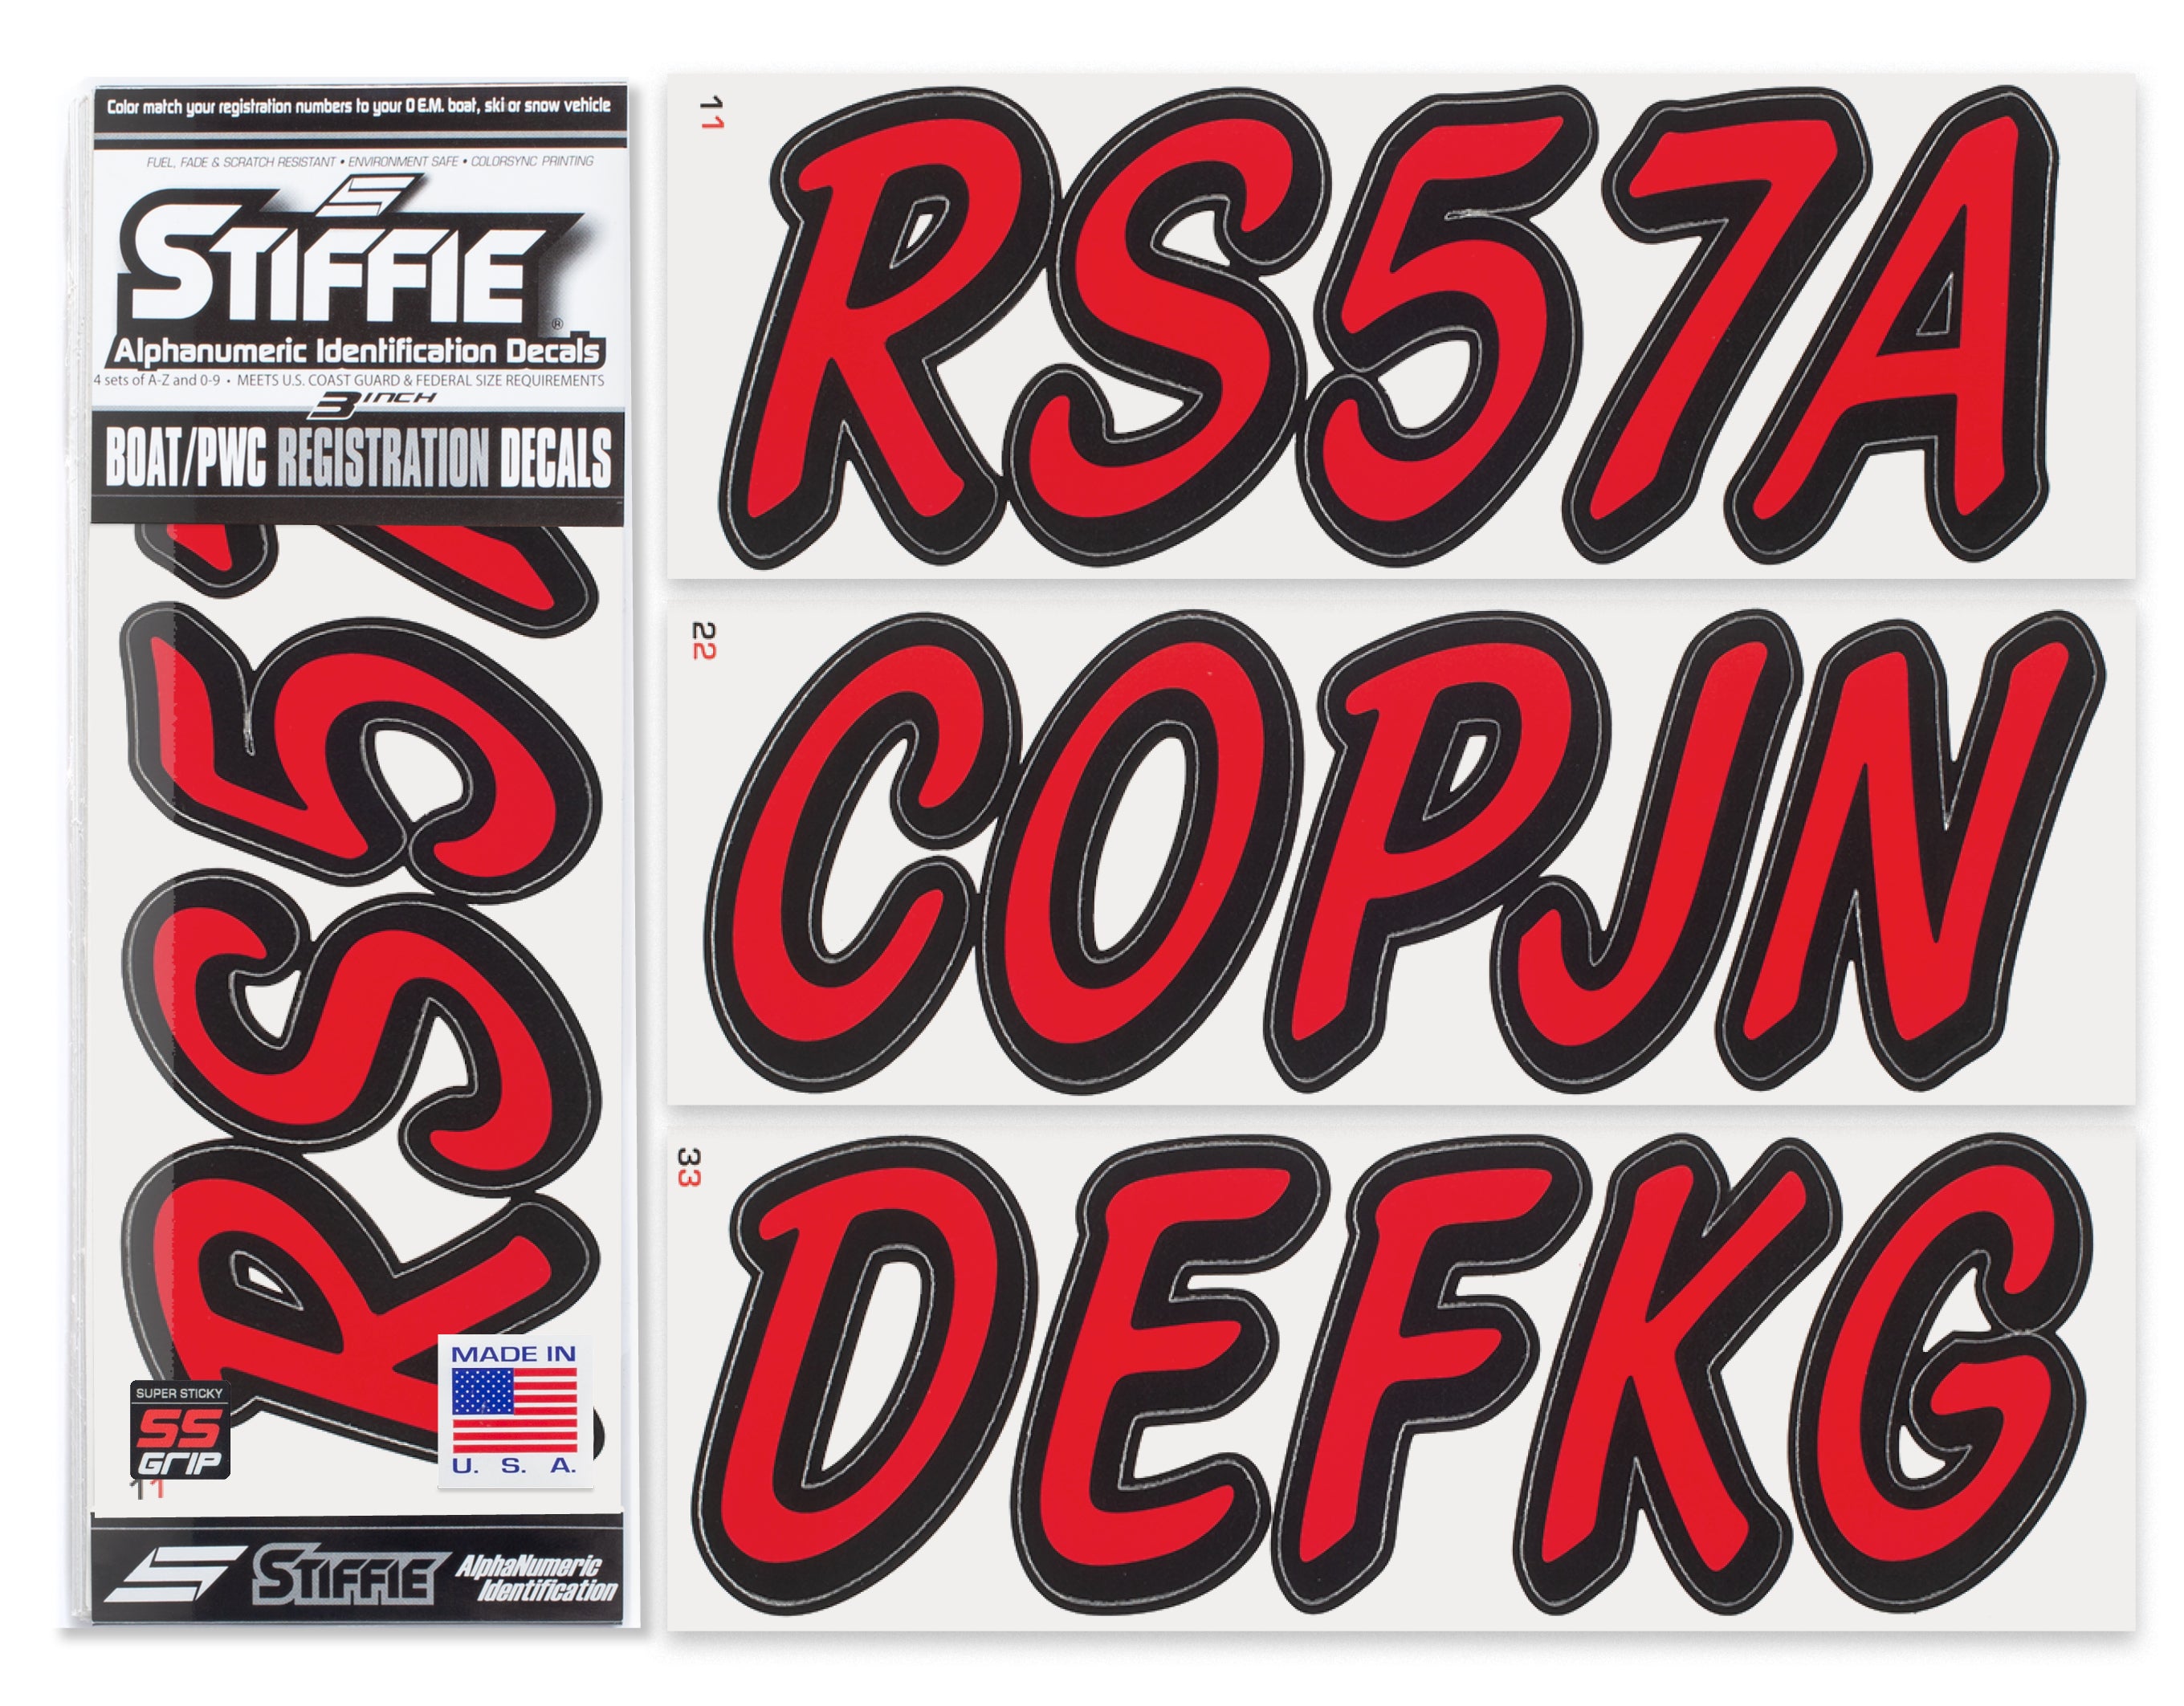 STIFFIE Whipline Solid Red/Black Super Sticky 3" Alpha-Numeric Registration Identification Numbers Stickers Decals for Boats & Personal Watercraft